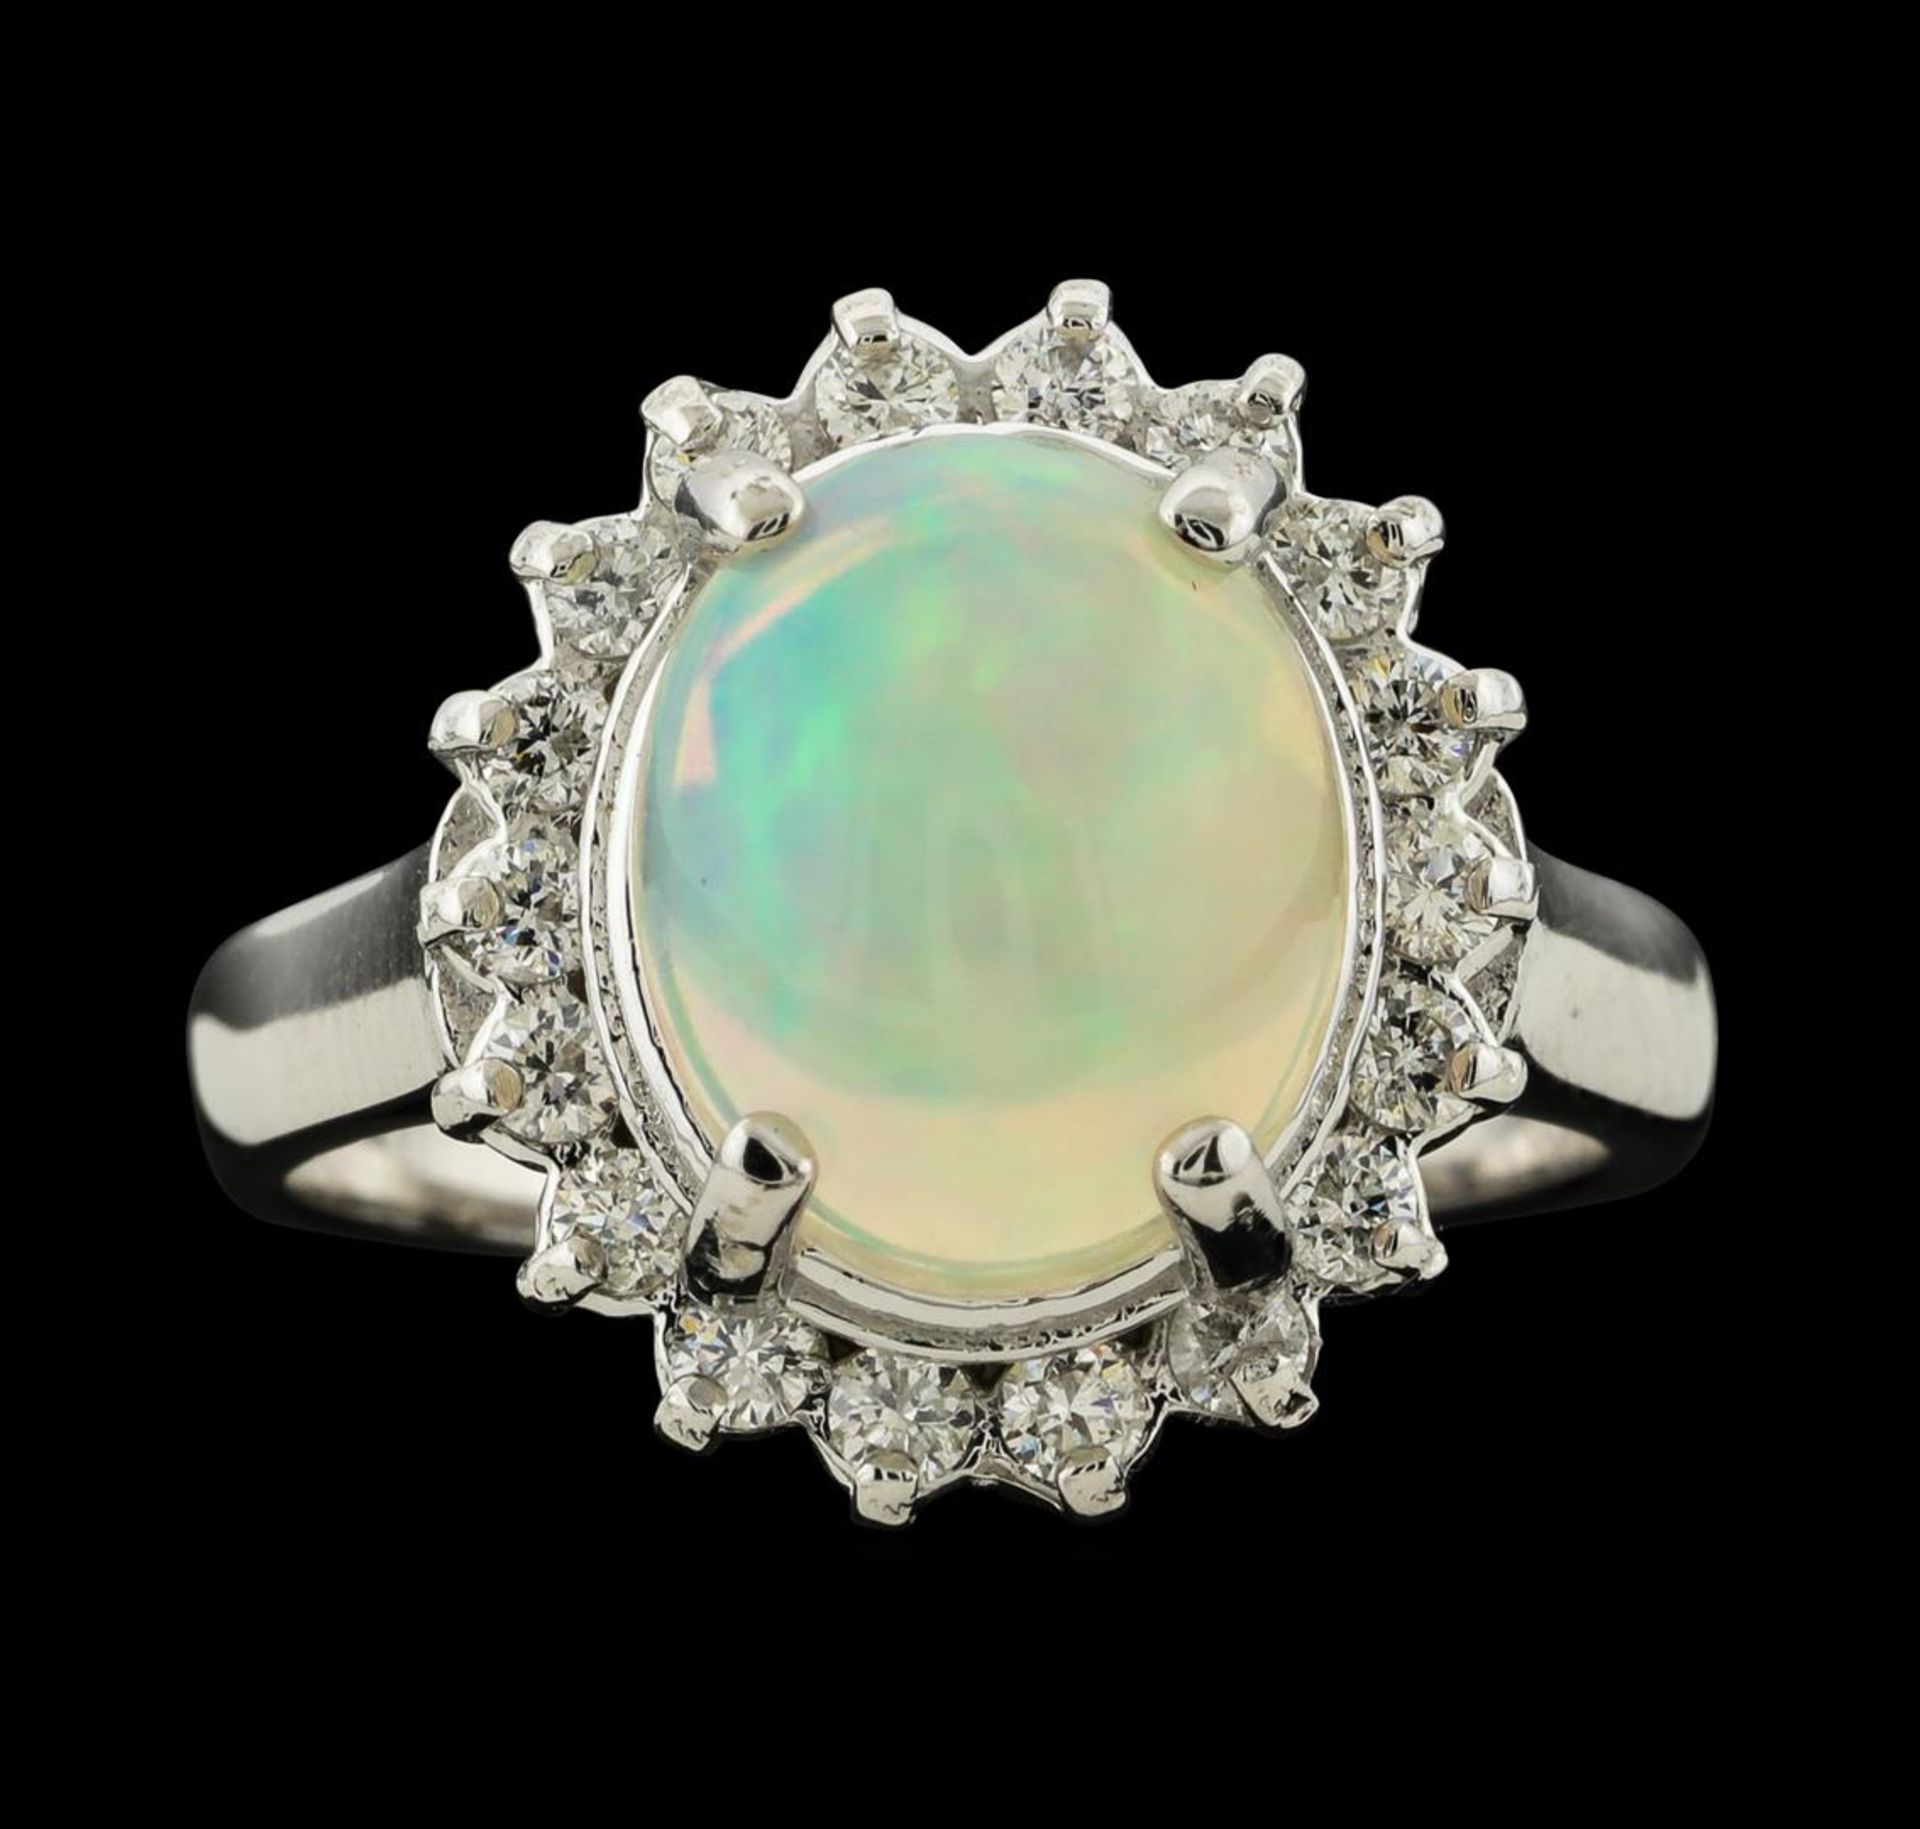 2.66 ctw Opal and Diamond Ring - 14KT White Gold - Image 2 of 4